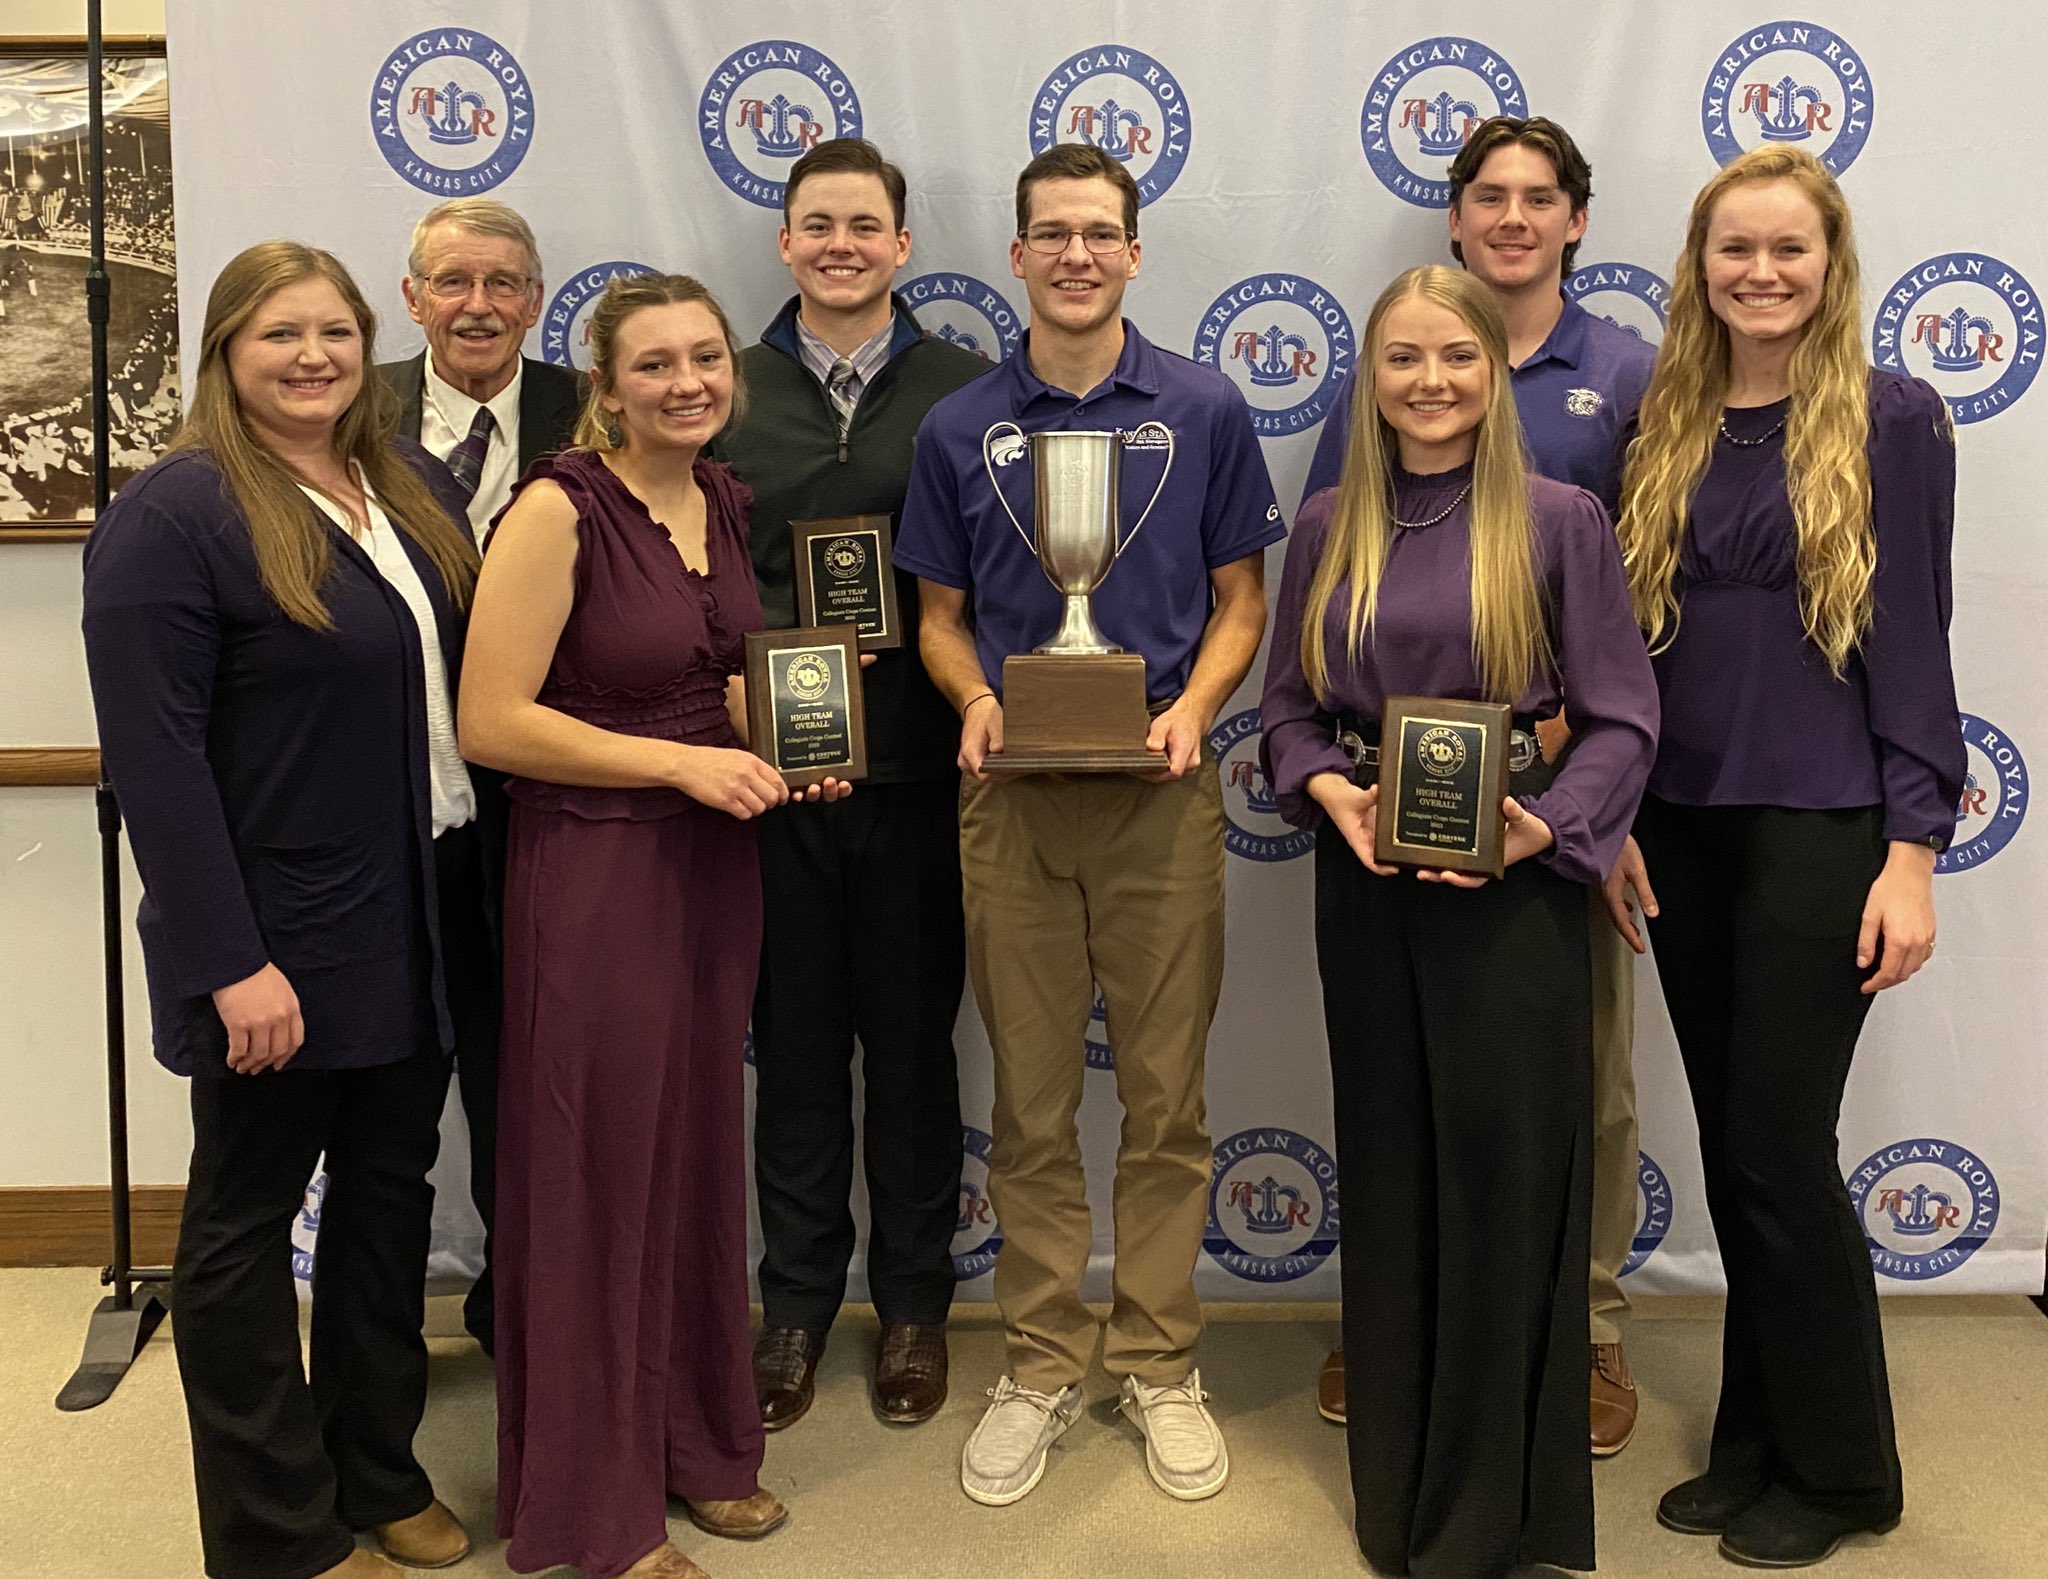 Members of K-State's 2023 Crops Judging team are (l to r) assistant coaches Sarah Frye and Kevin Donnelly, Molly Kane, Landon Trout, Quinten Bina, Renae Sinclair, Joel Bryan, and head coach Rachel Veenstra. (Photo courtesy of Kansas State University.)